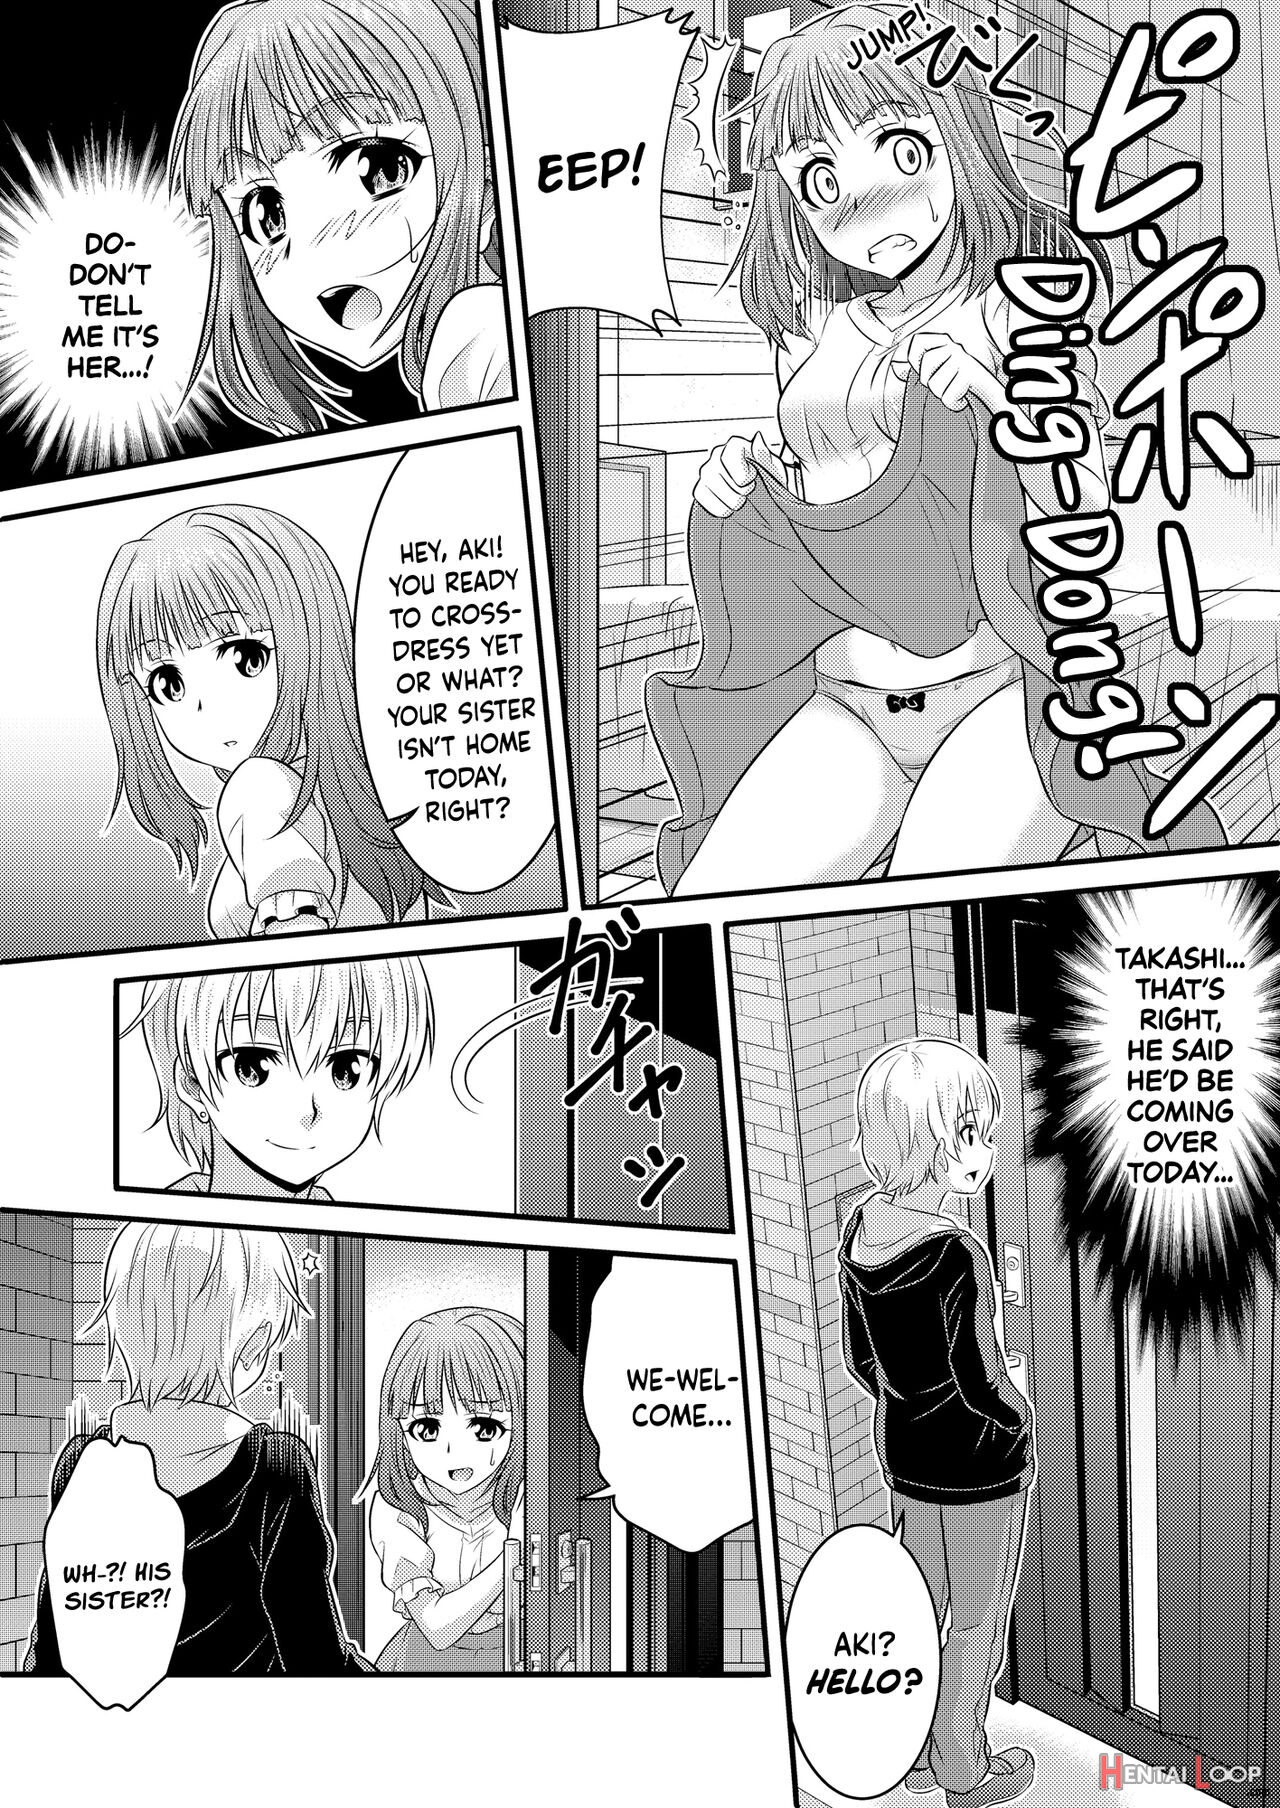 Metamorphic ★ Dress-up ~how I Ended Up Turning Into The Girls I Cross-dressed As~ Sister Arc & Classmate Arc page 9